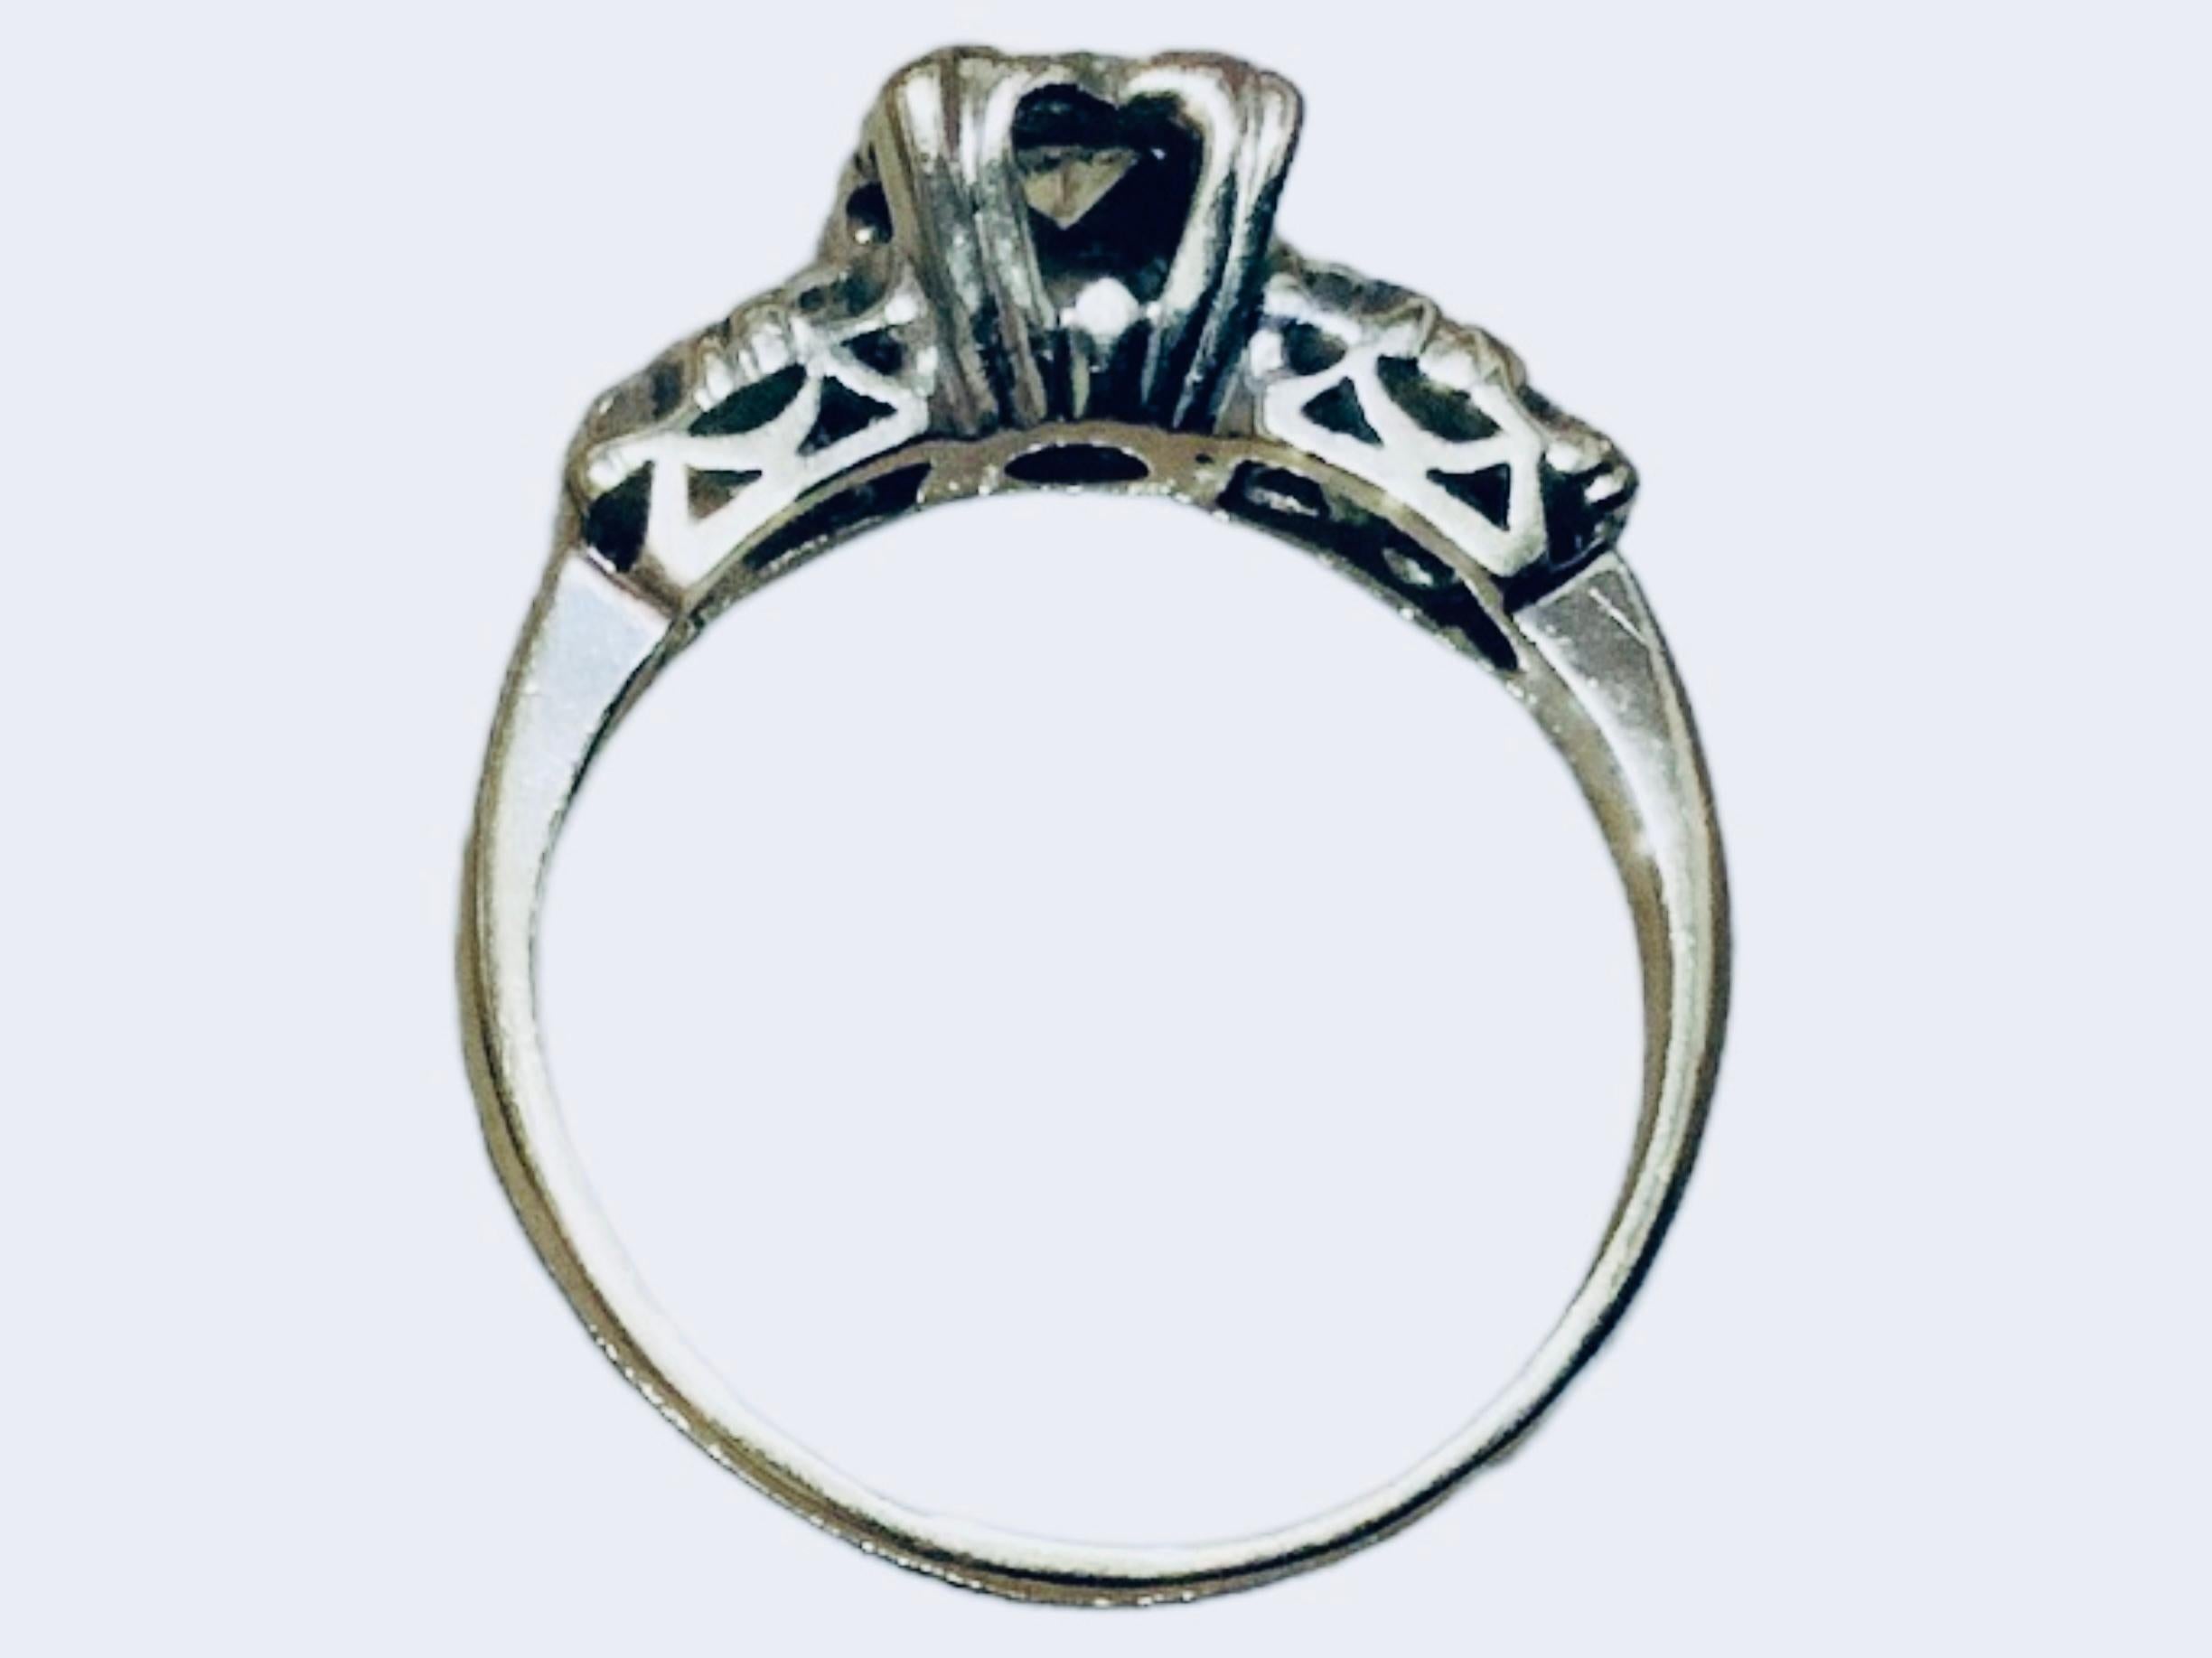 This is a 14 K White Gold and Diamond Wedding Ring. It depicts a white gold band adorned with four small flowers in a row and a large one in the center. All of them enhanced by a single cut diamonds, being the center one a round brilliant cut. It is